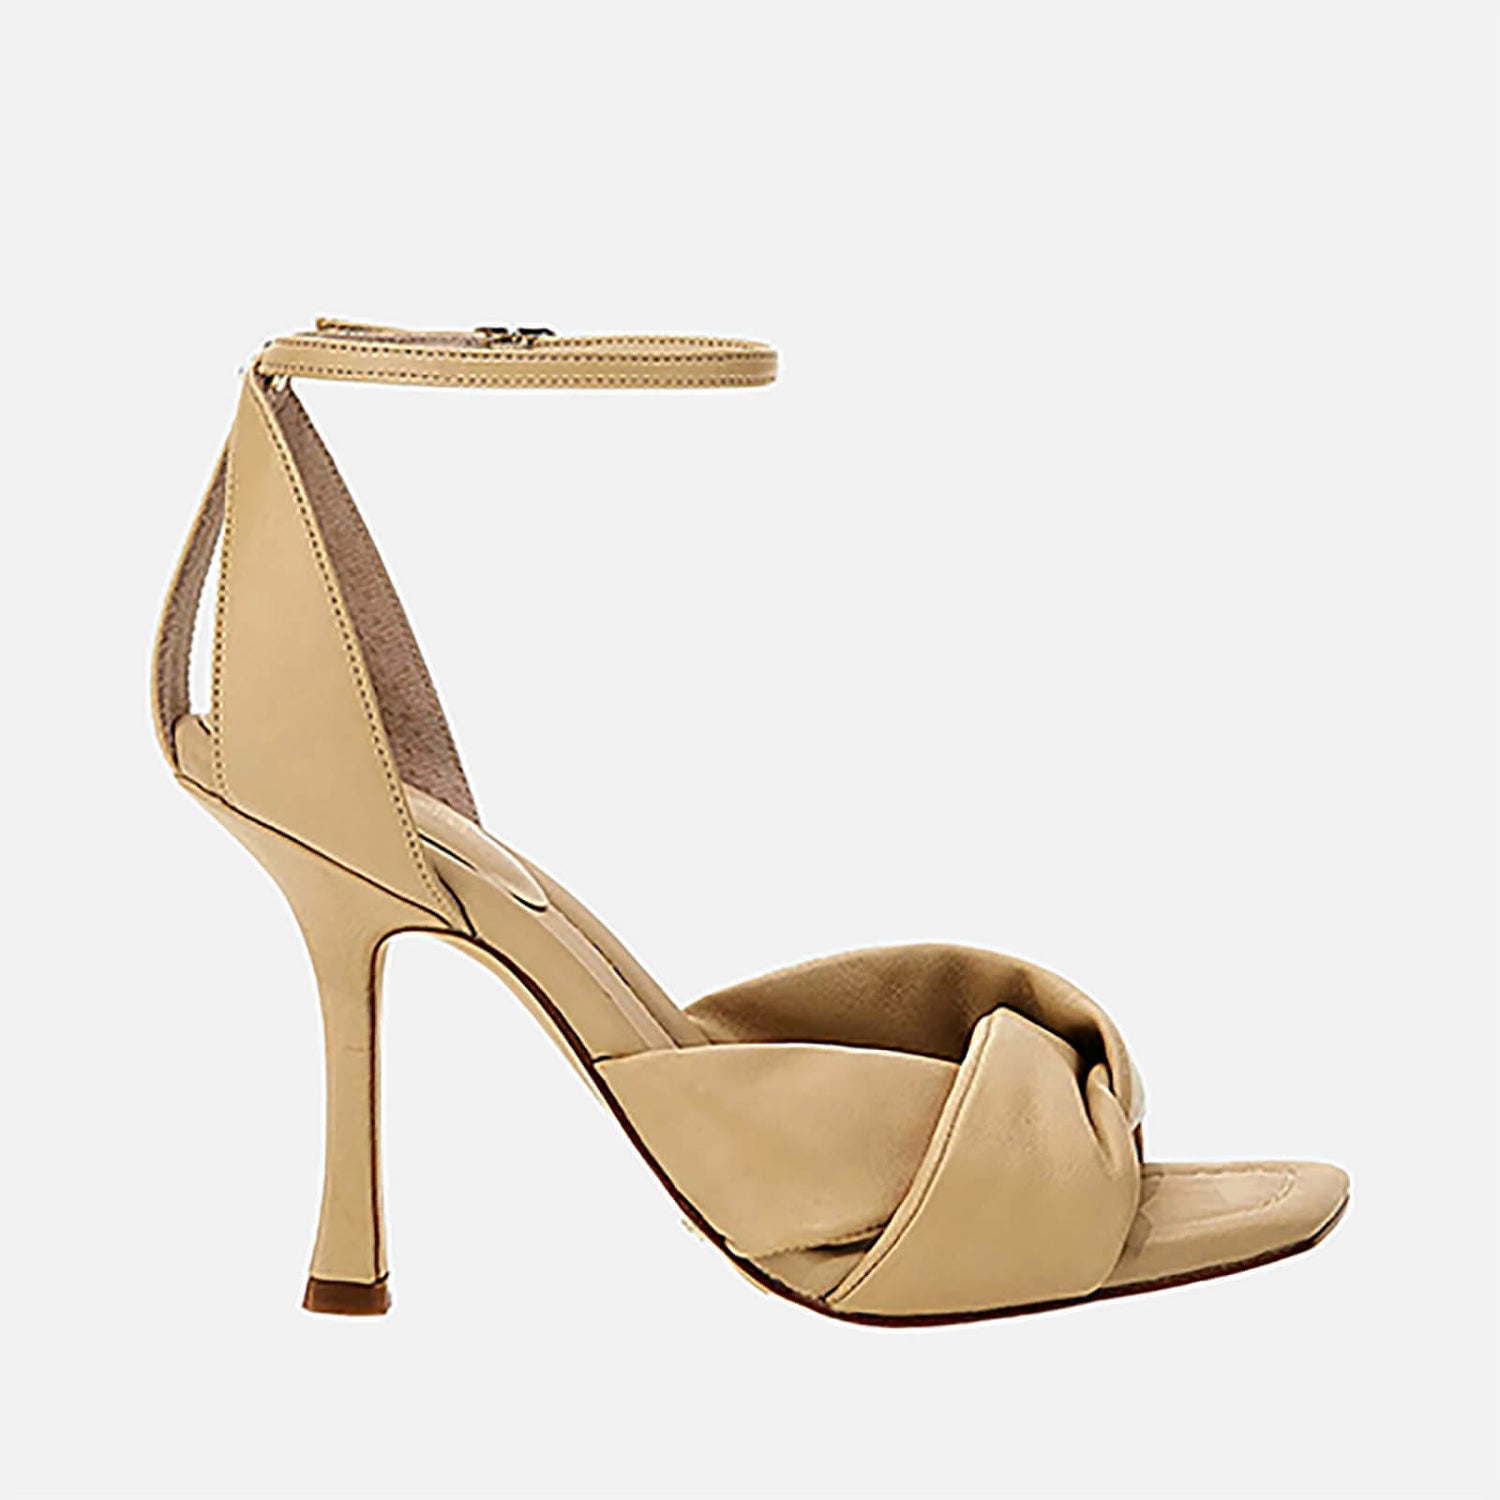 Guess Hyson Leather Heeled Sandals - UK 6